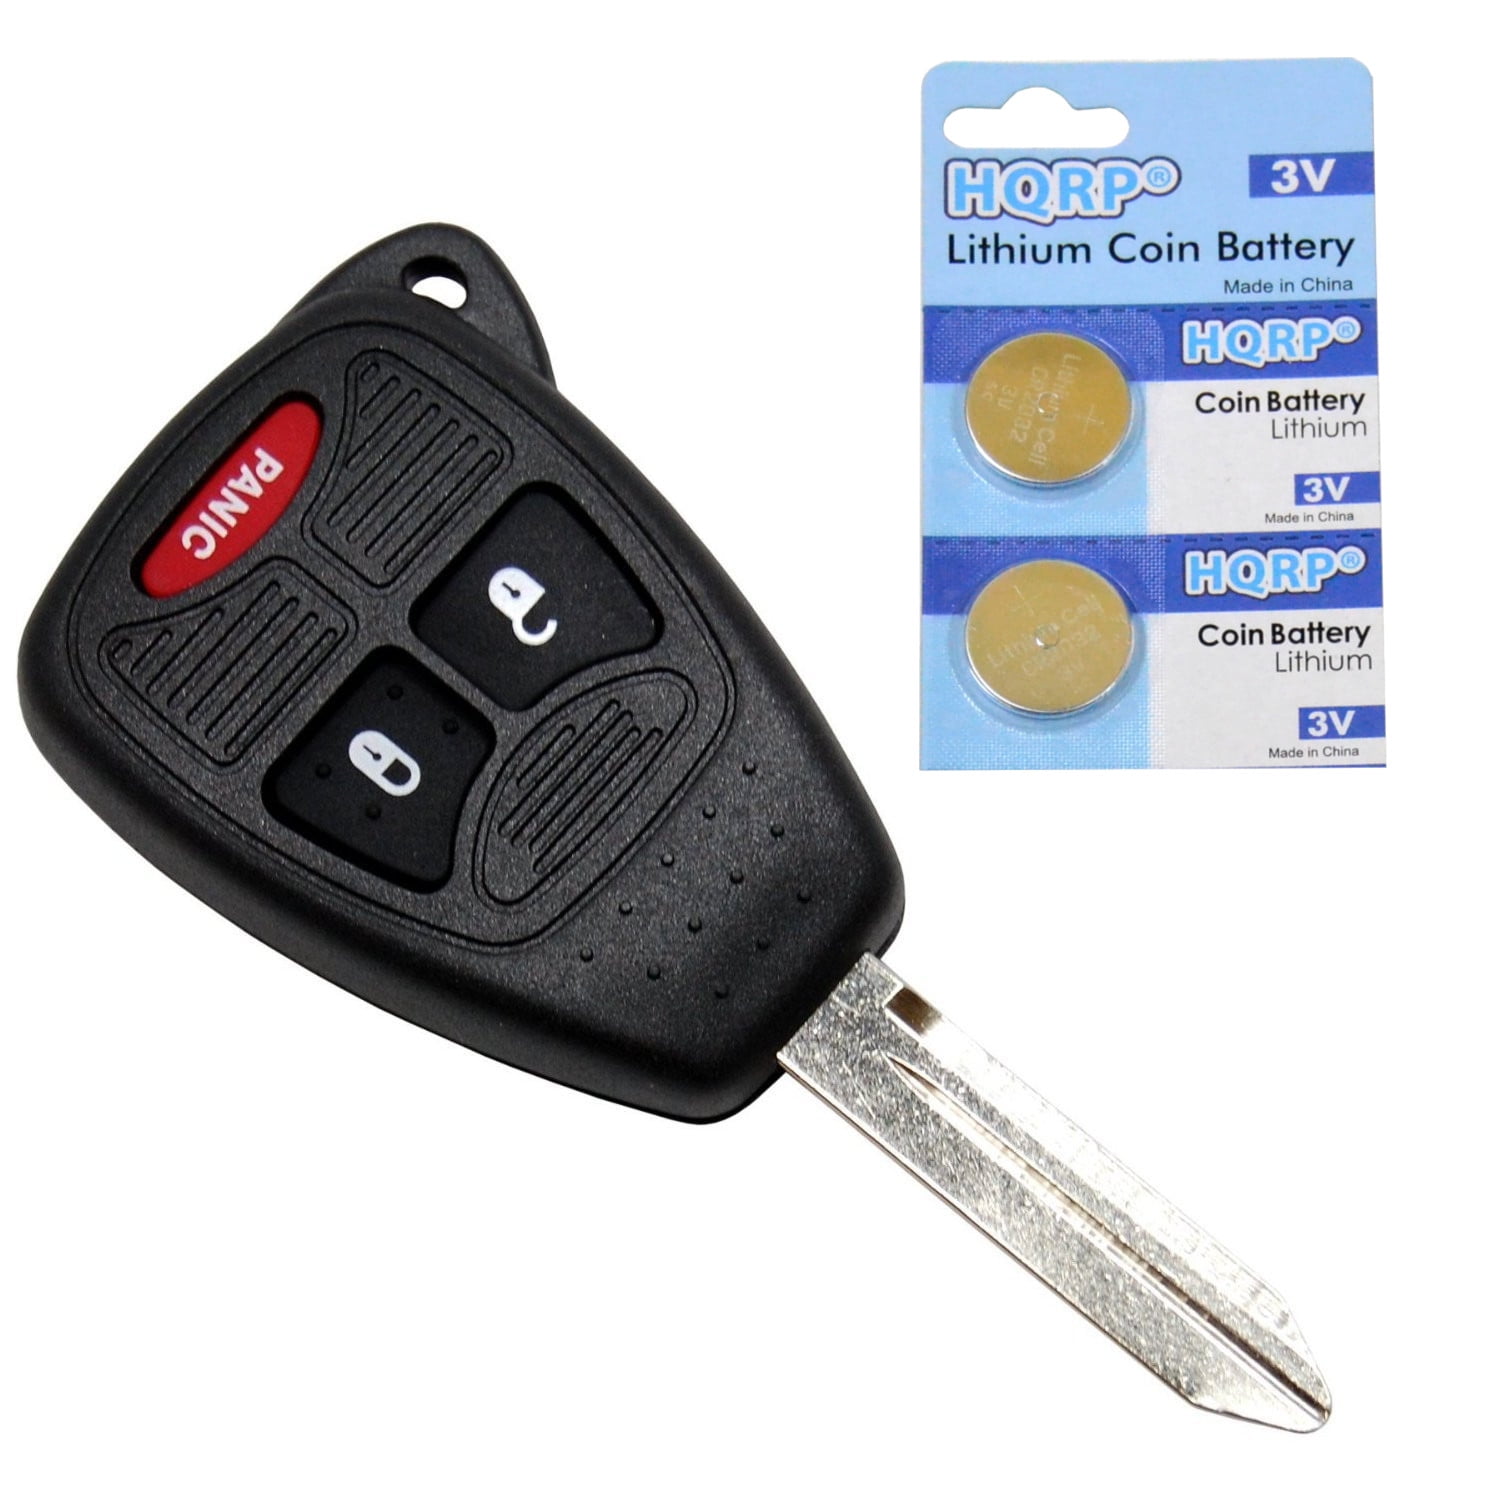 2 Replacement for Dodge Caliber 2007 2008 2009 2010 2011 2012 Key Remote Fob